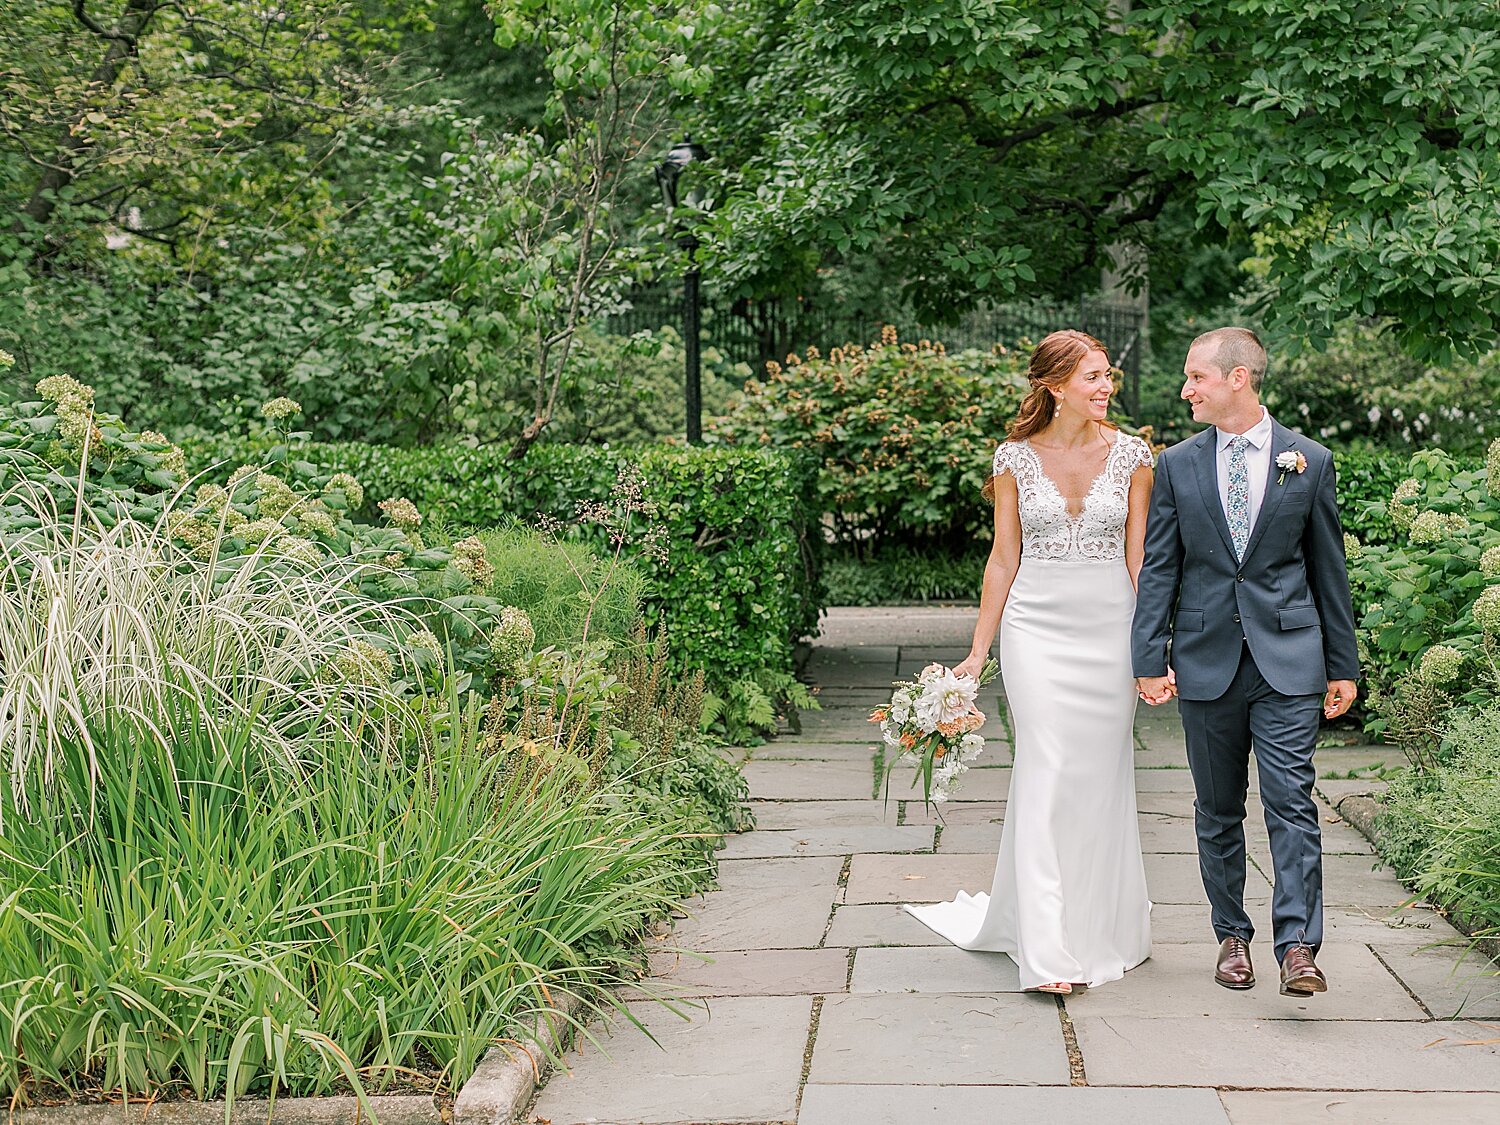 newlyweds stroll through NYC gardens | Asher Gardner Photography | Elopement at the Central Park Conservatory Gardens